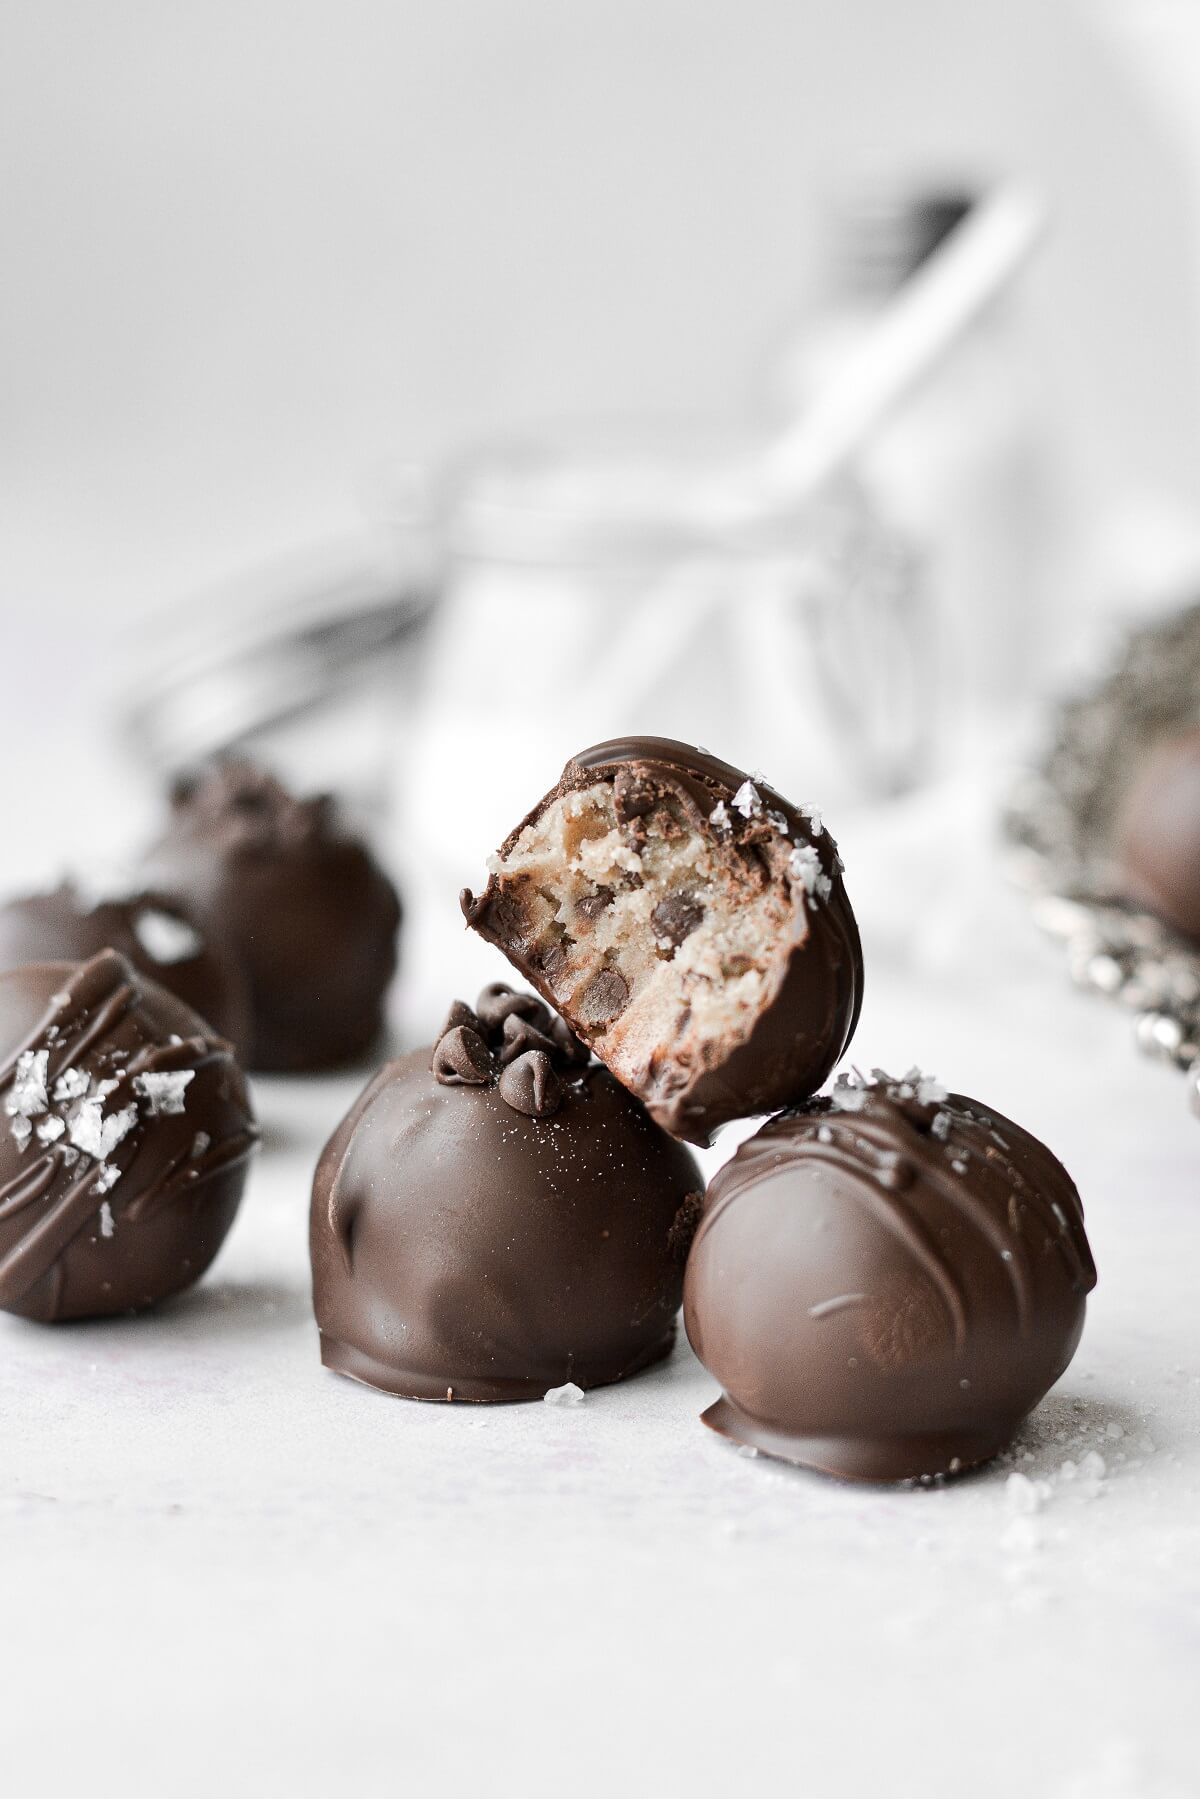 Chocolate chip cookie dough truffles, one with a bite taken.